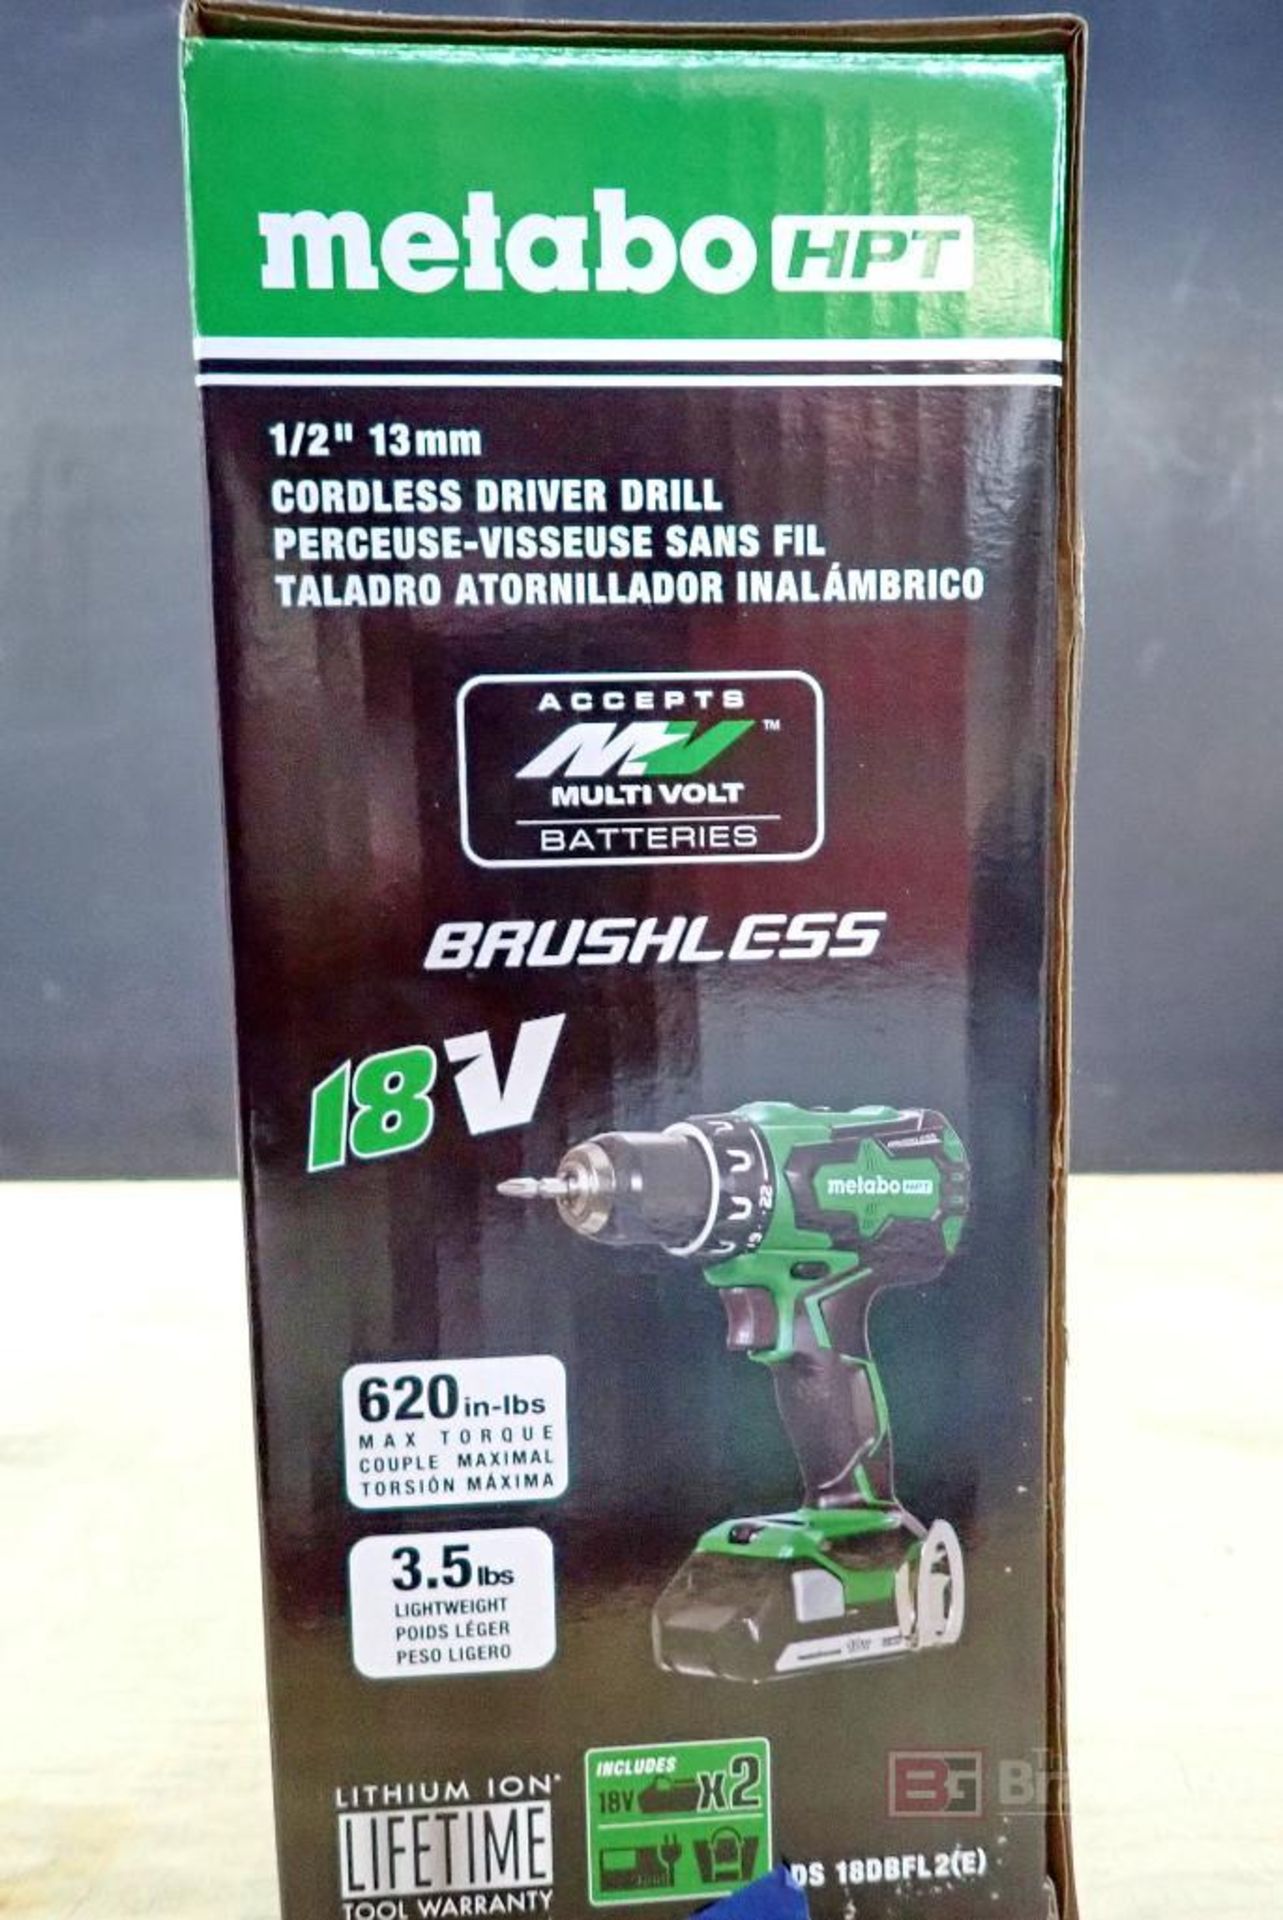 Metabo HPT DS 18DBFL2(E) 1/2" 13mm Cordless Driver Drill - Image 3 of 5